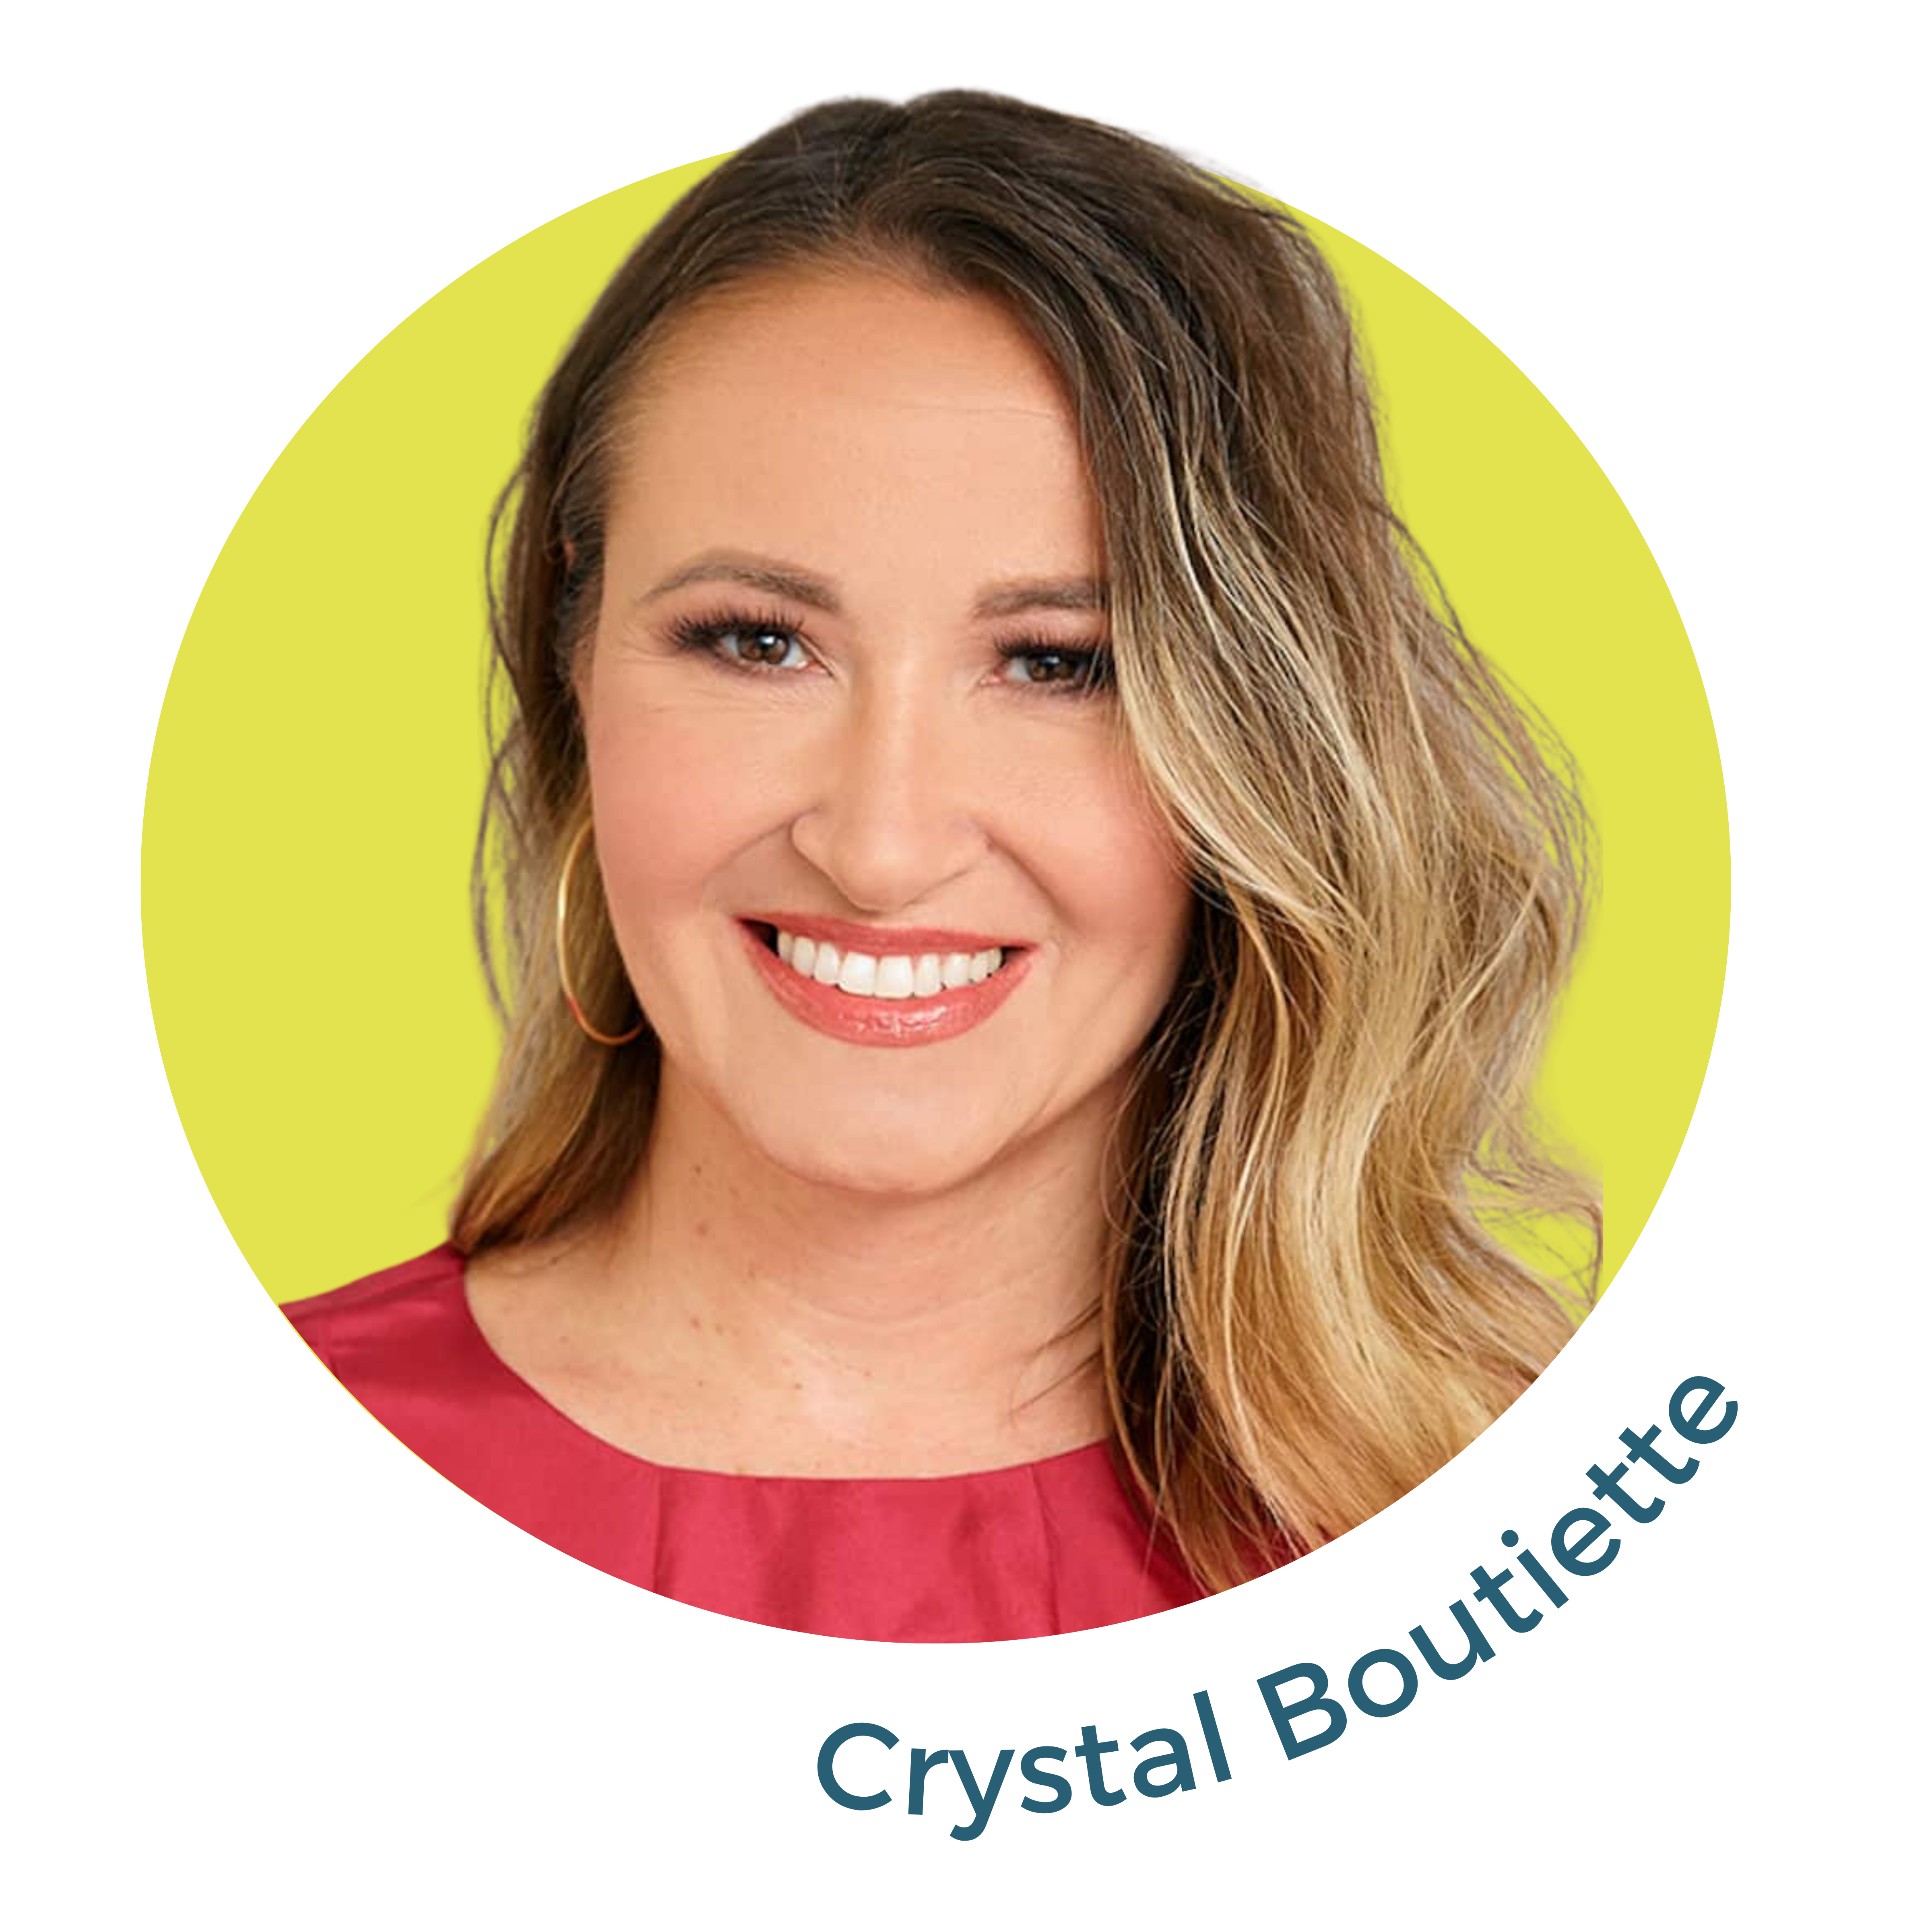 Crystal Boutiette